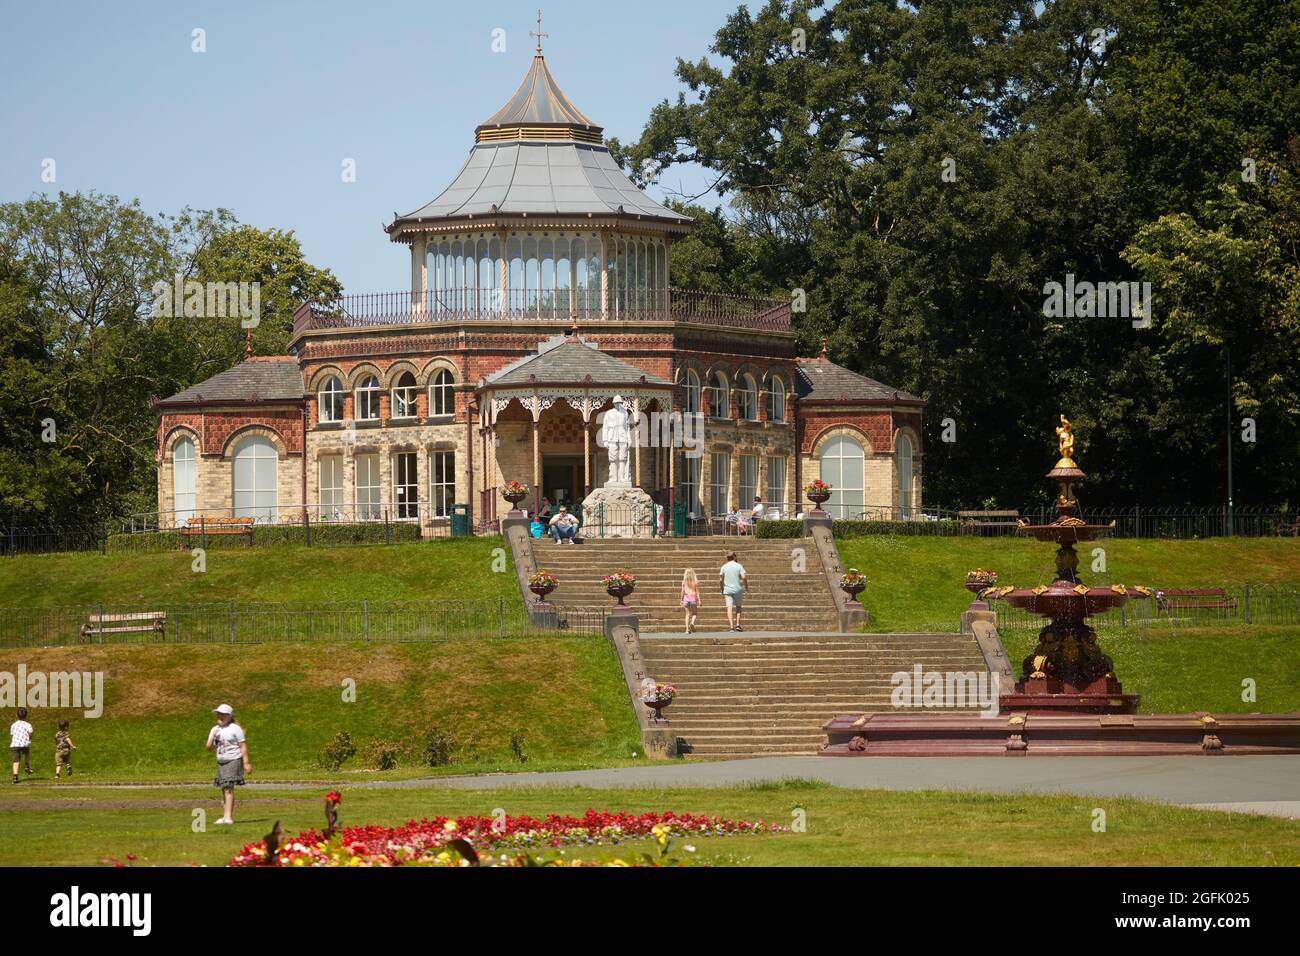 Wigan town centre  Lancashire, Wigan Grade II listed Mesnes Park with  Victorian octagonal pavilion, The Boer War memorial and The Coalbrookdale fount Stock Photo